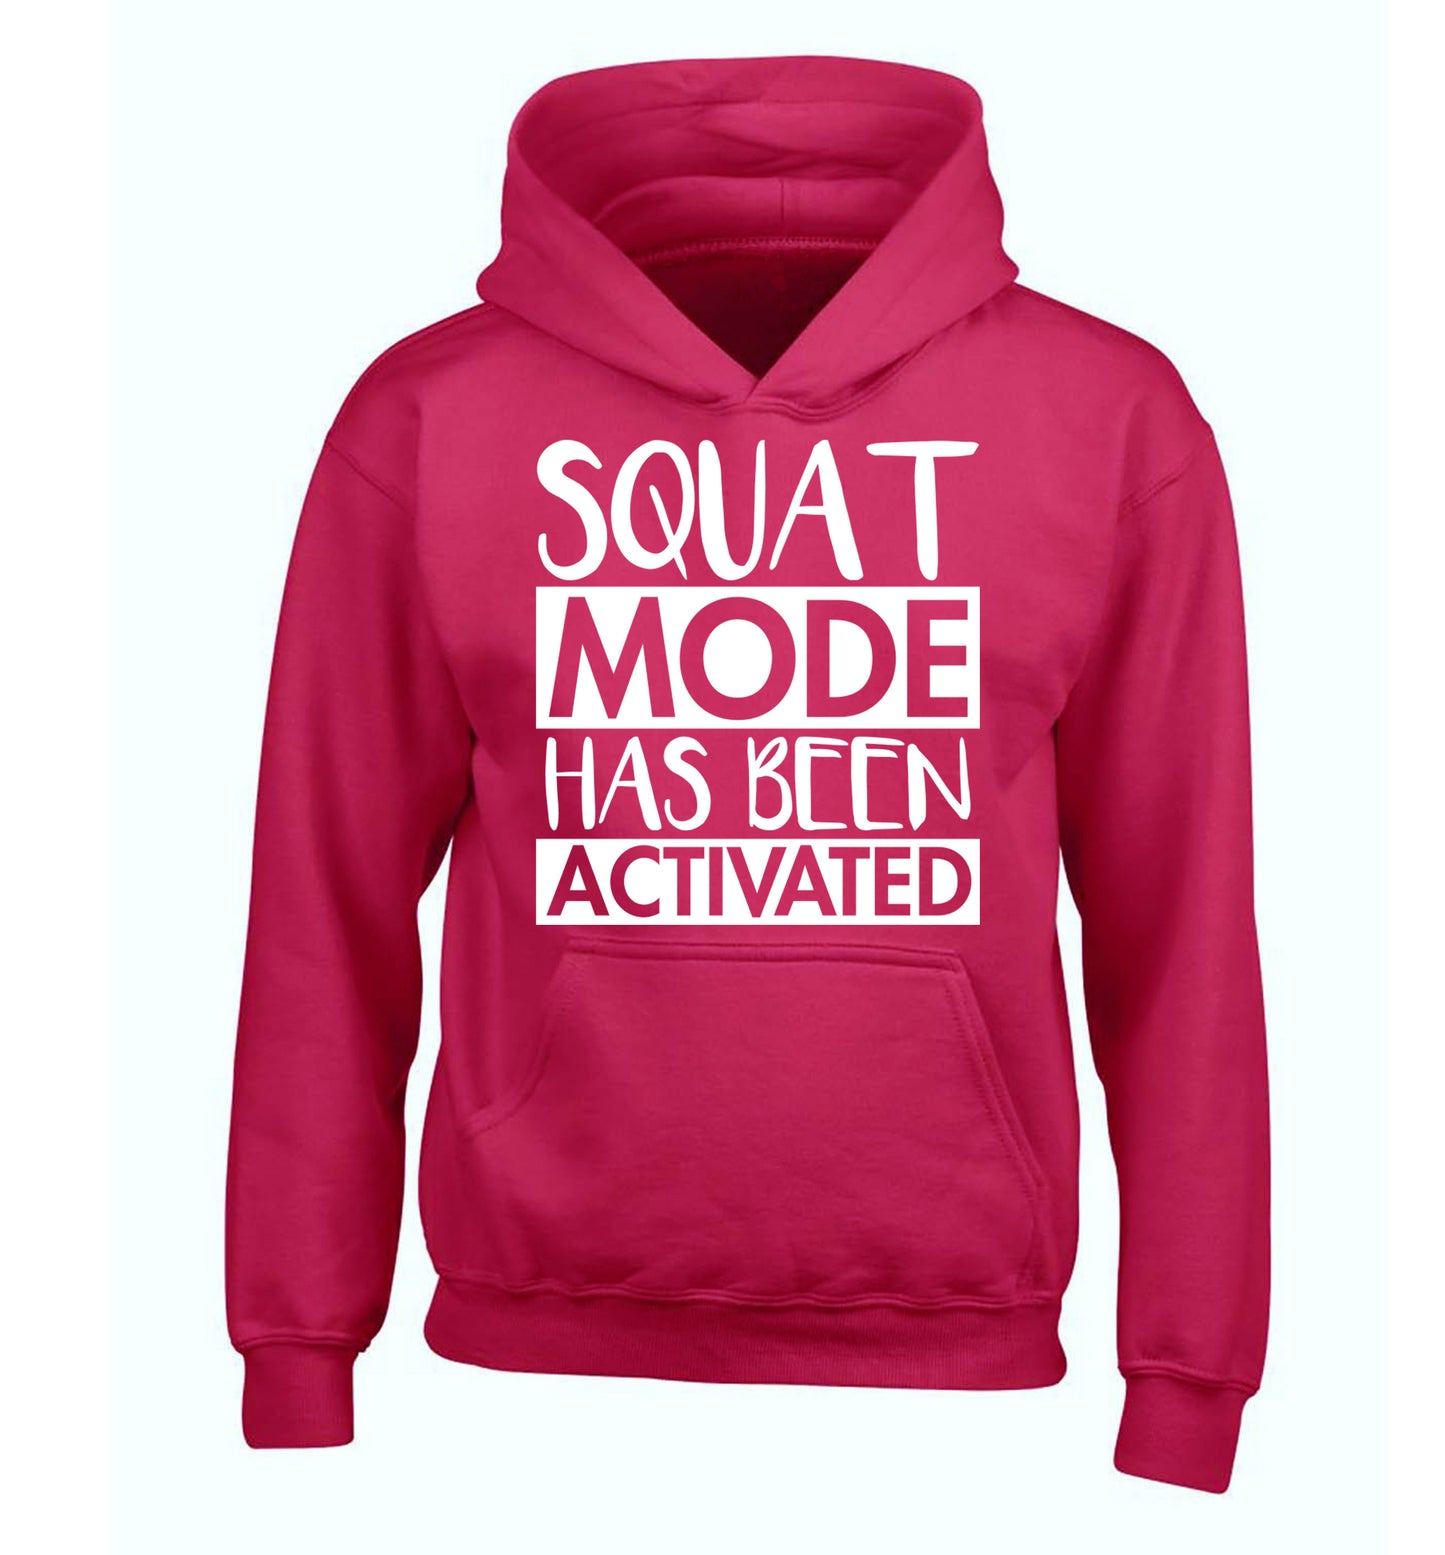 Squat mode activated children's pink hoodie 12-14 Years